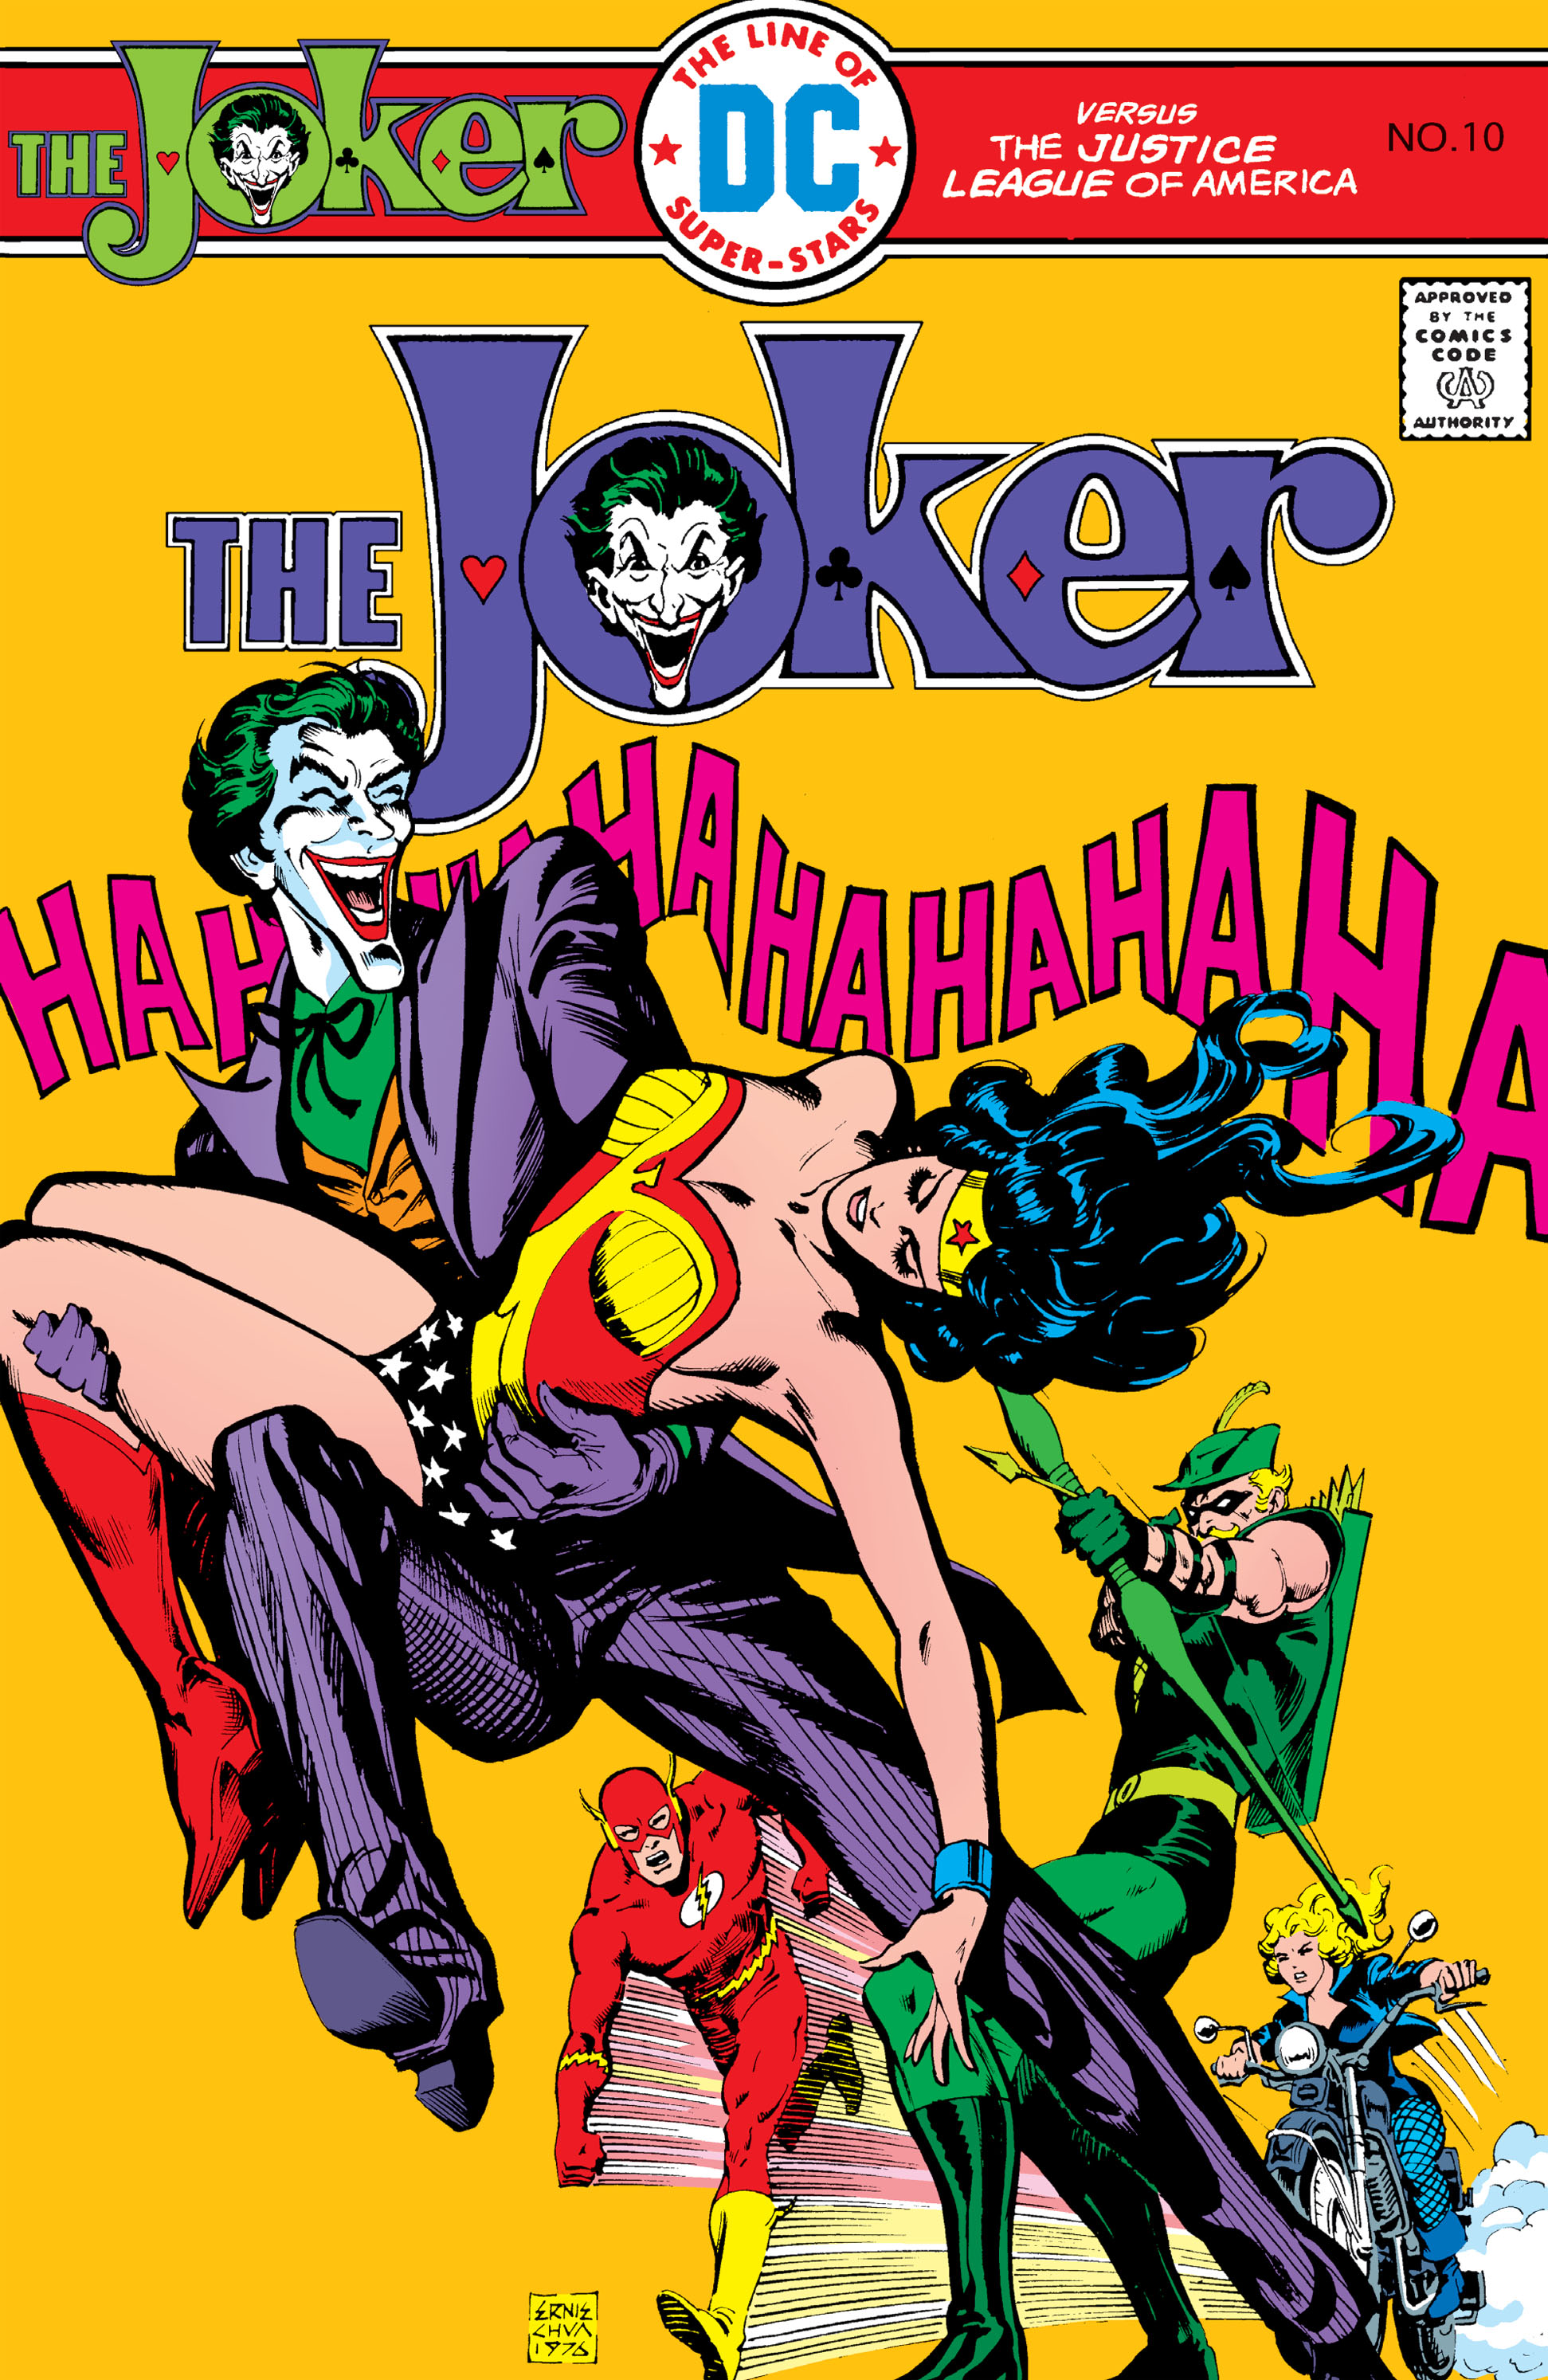 The Joker (1975-1976 + 2019): Chapter 10 - Page 1